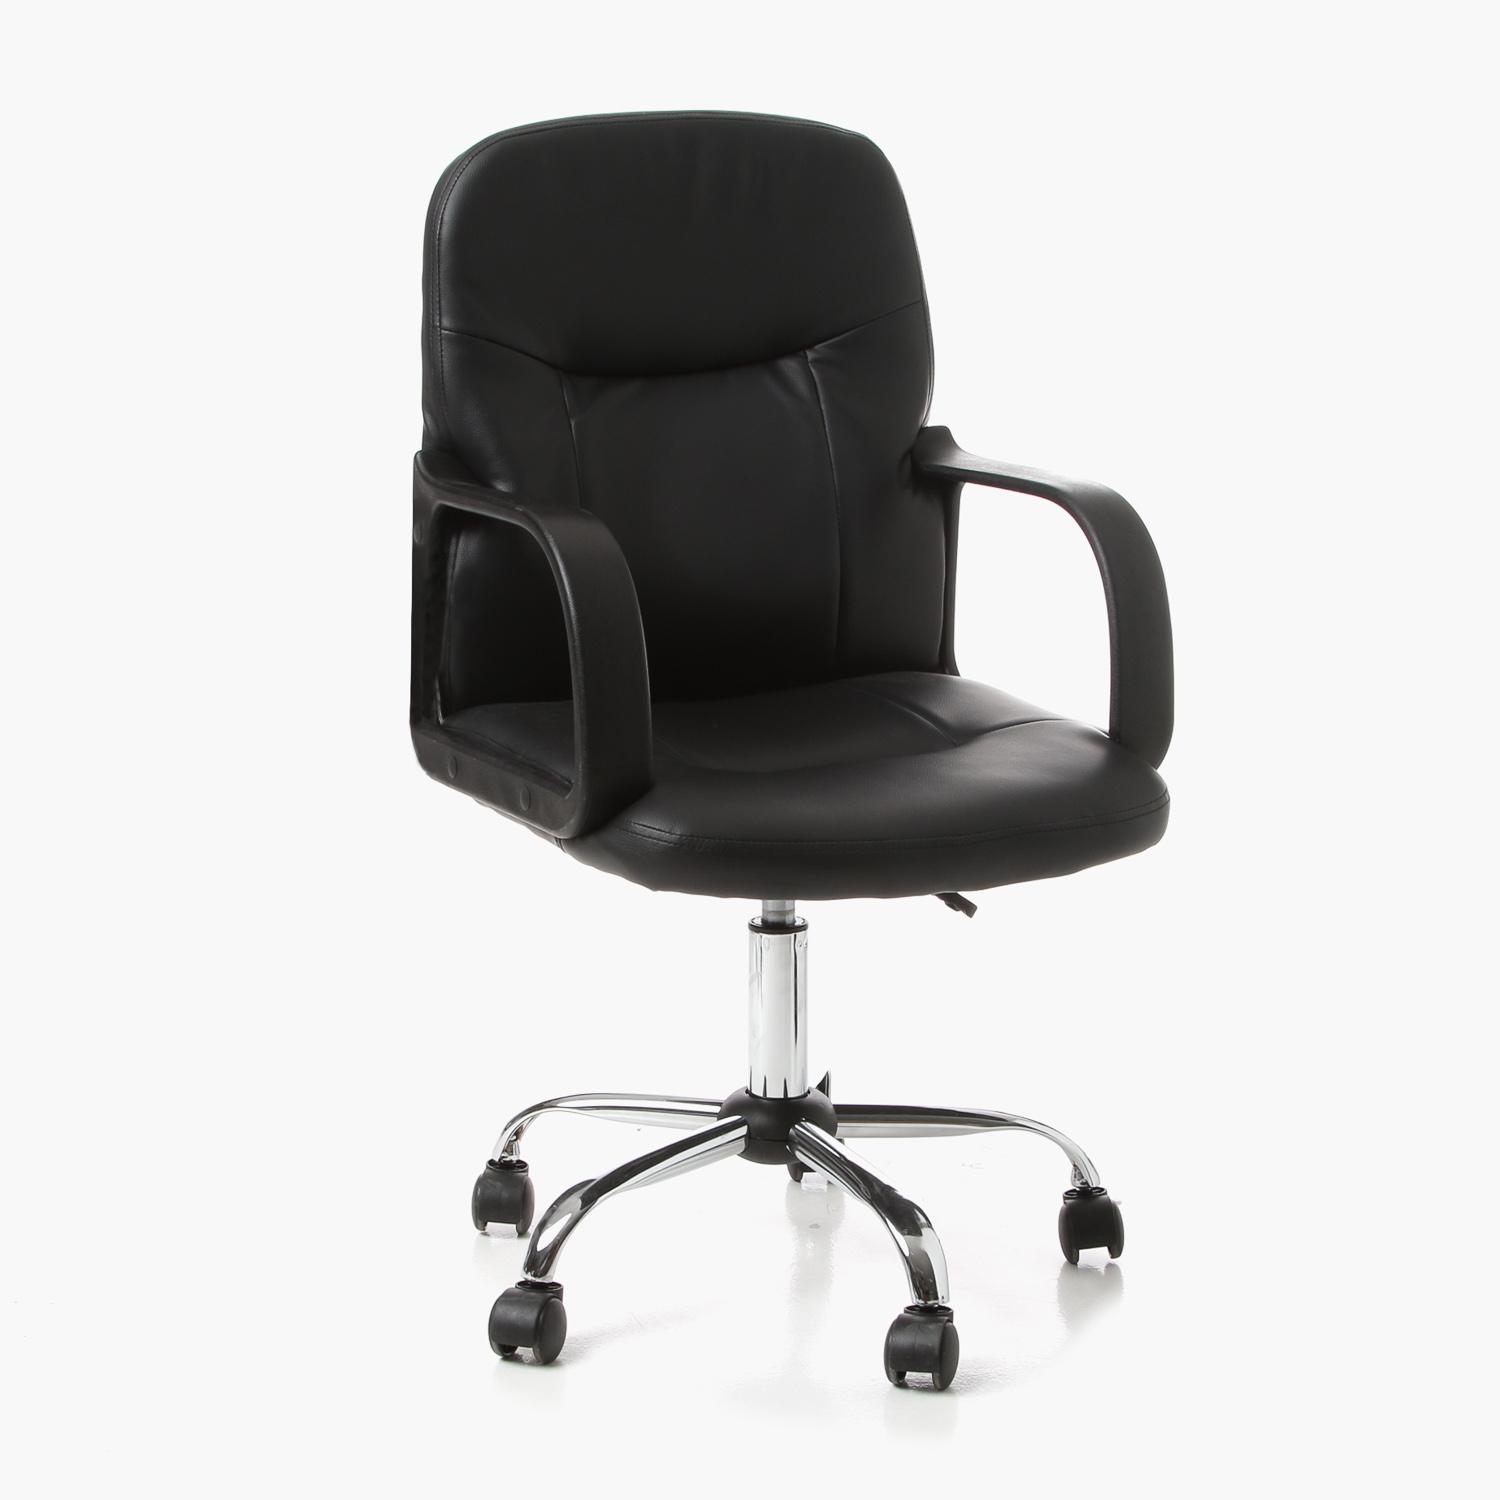 Sm Home Tack Office Chair Buy Sell Online Home Office Chairs With Cheap Price Lazada Ph